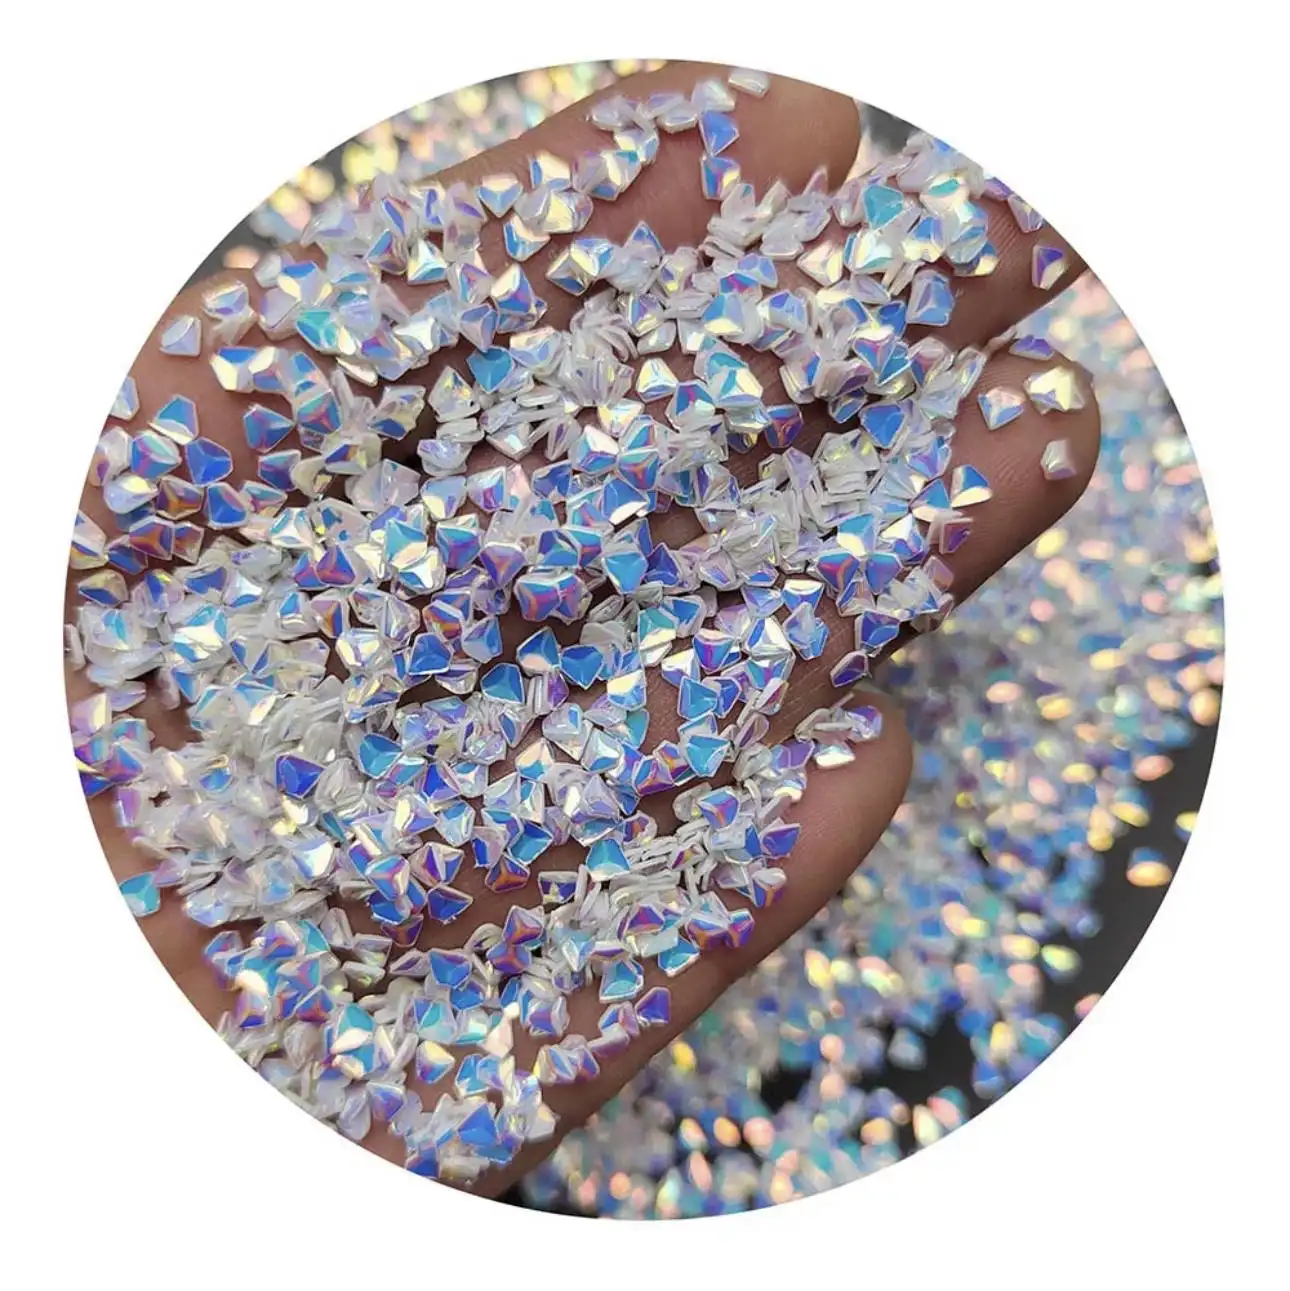 Holographic Glitter 3mm Micro Diamond Shape Sequins For Nail Art Decorations